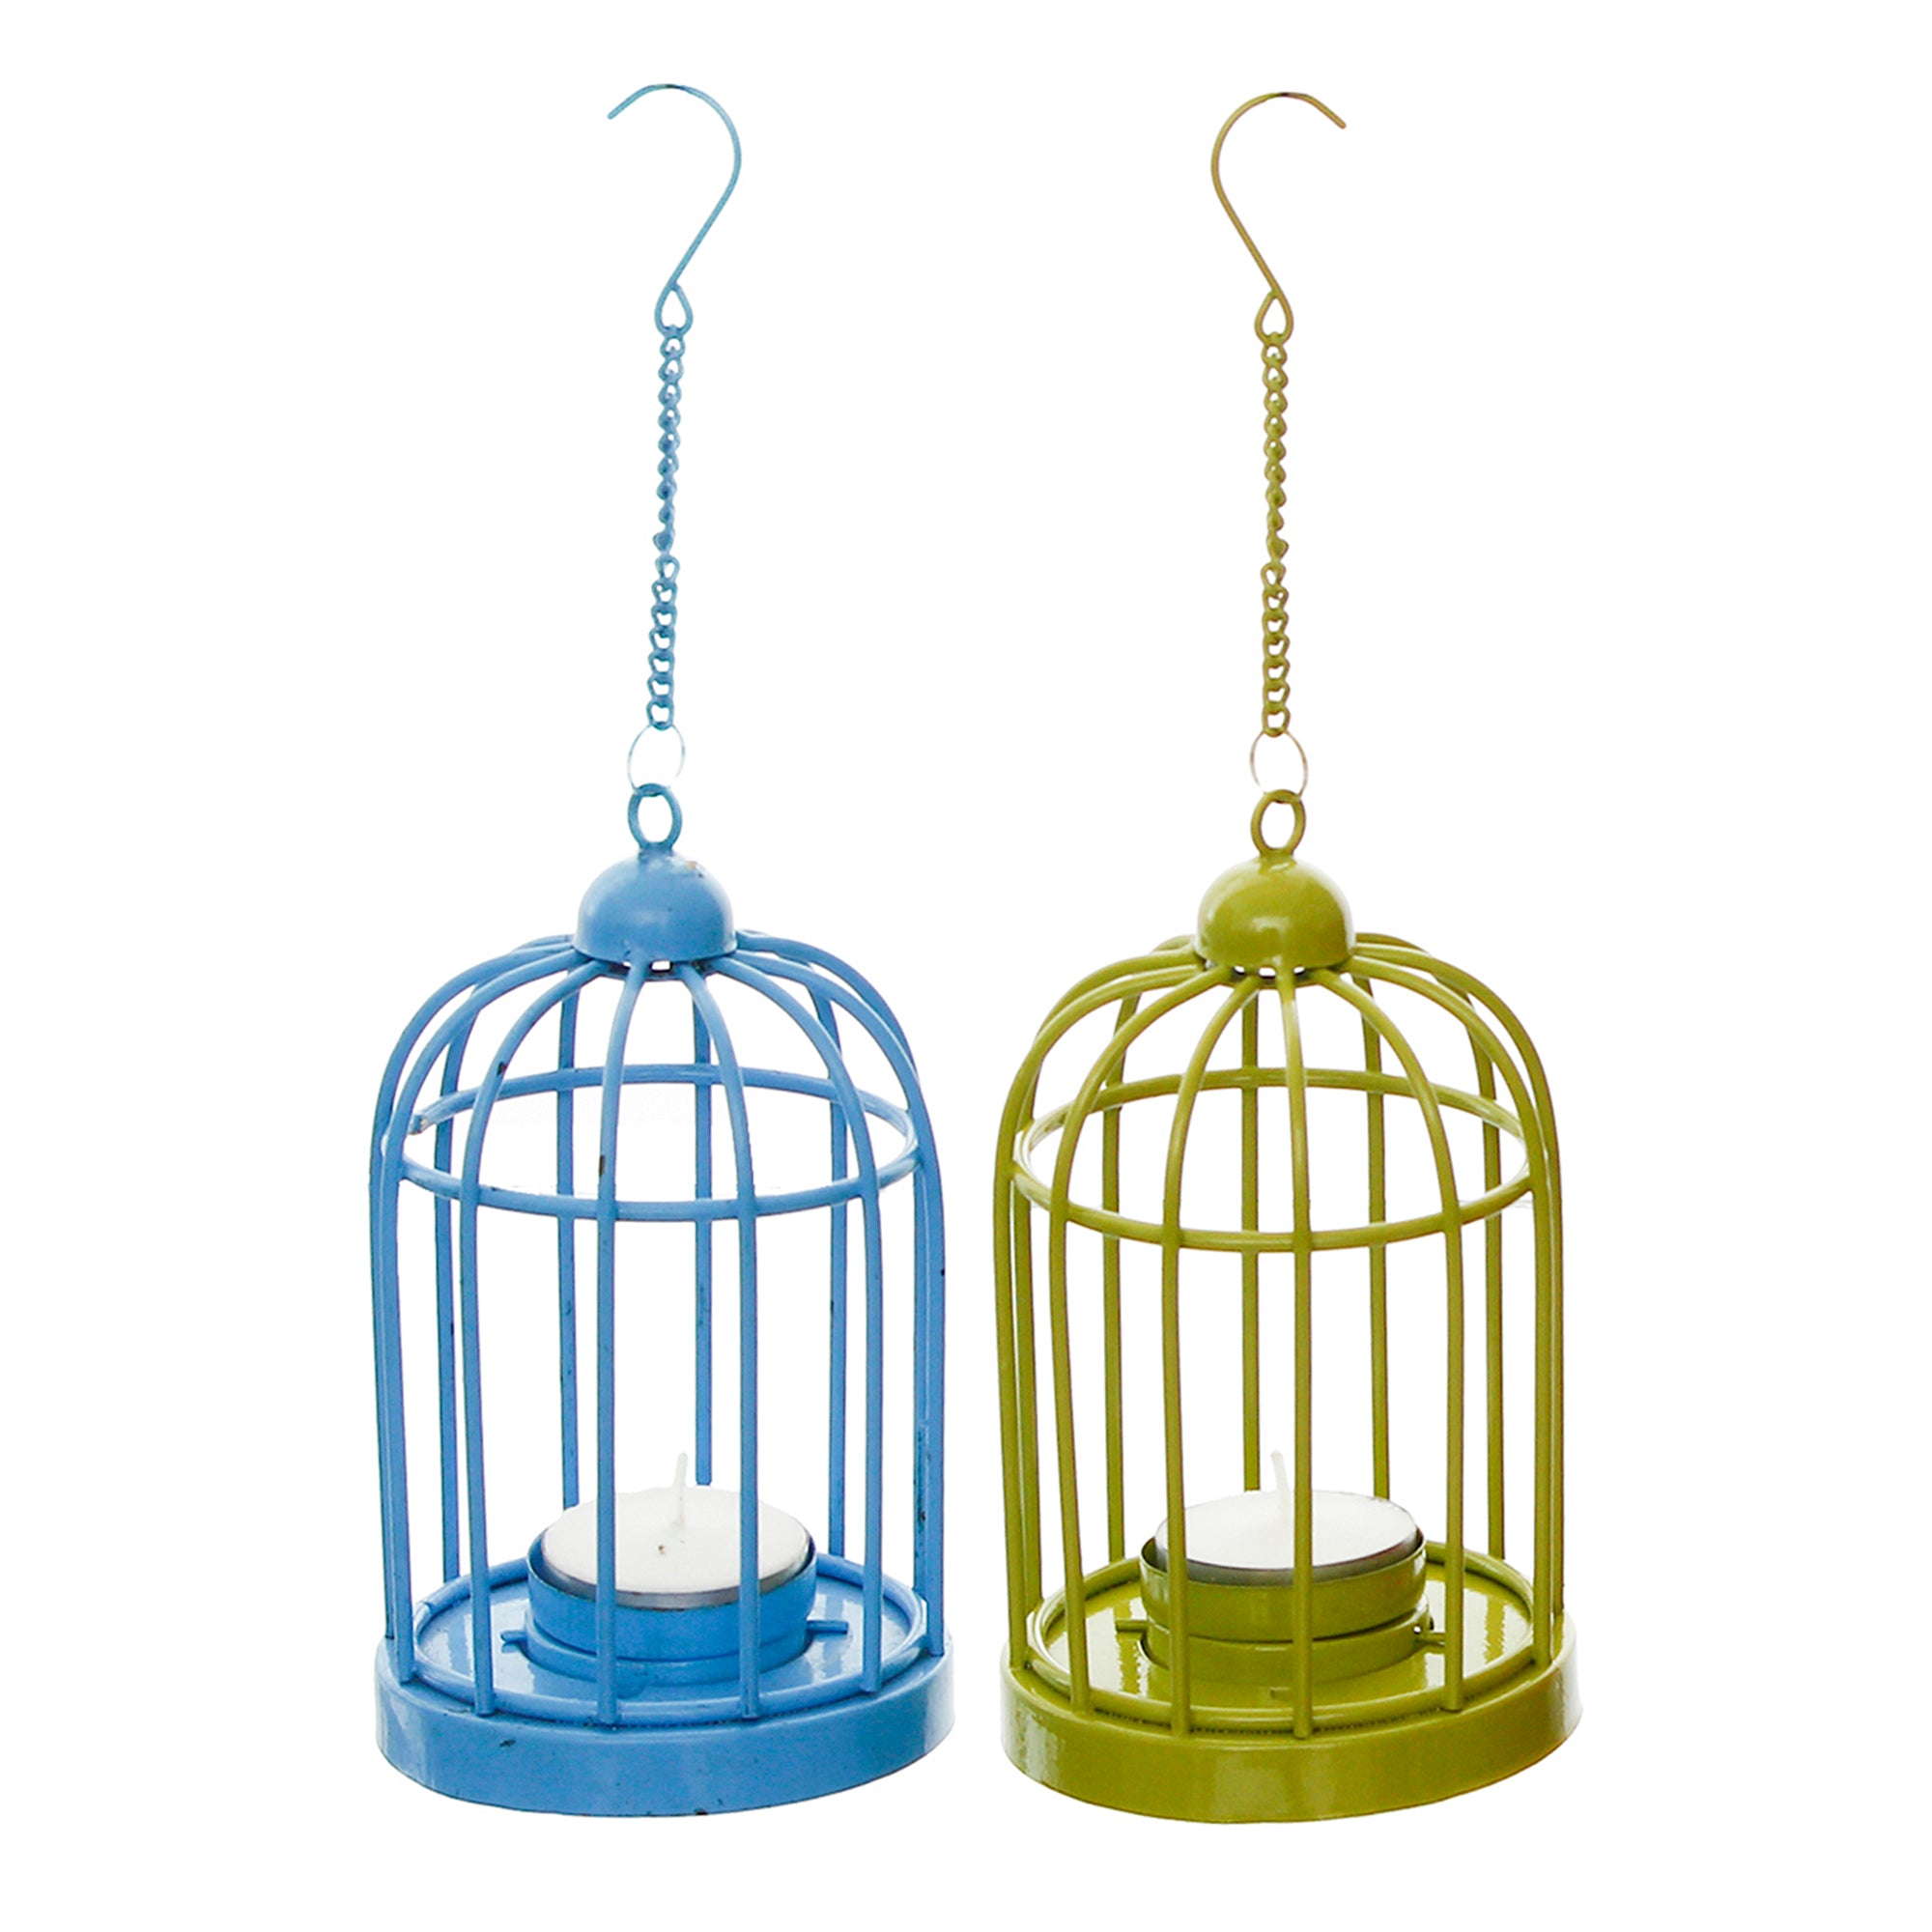 Set of 2 Blue and Green Iron Cage Tea Light candle Holder With Hanging Chain 5